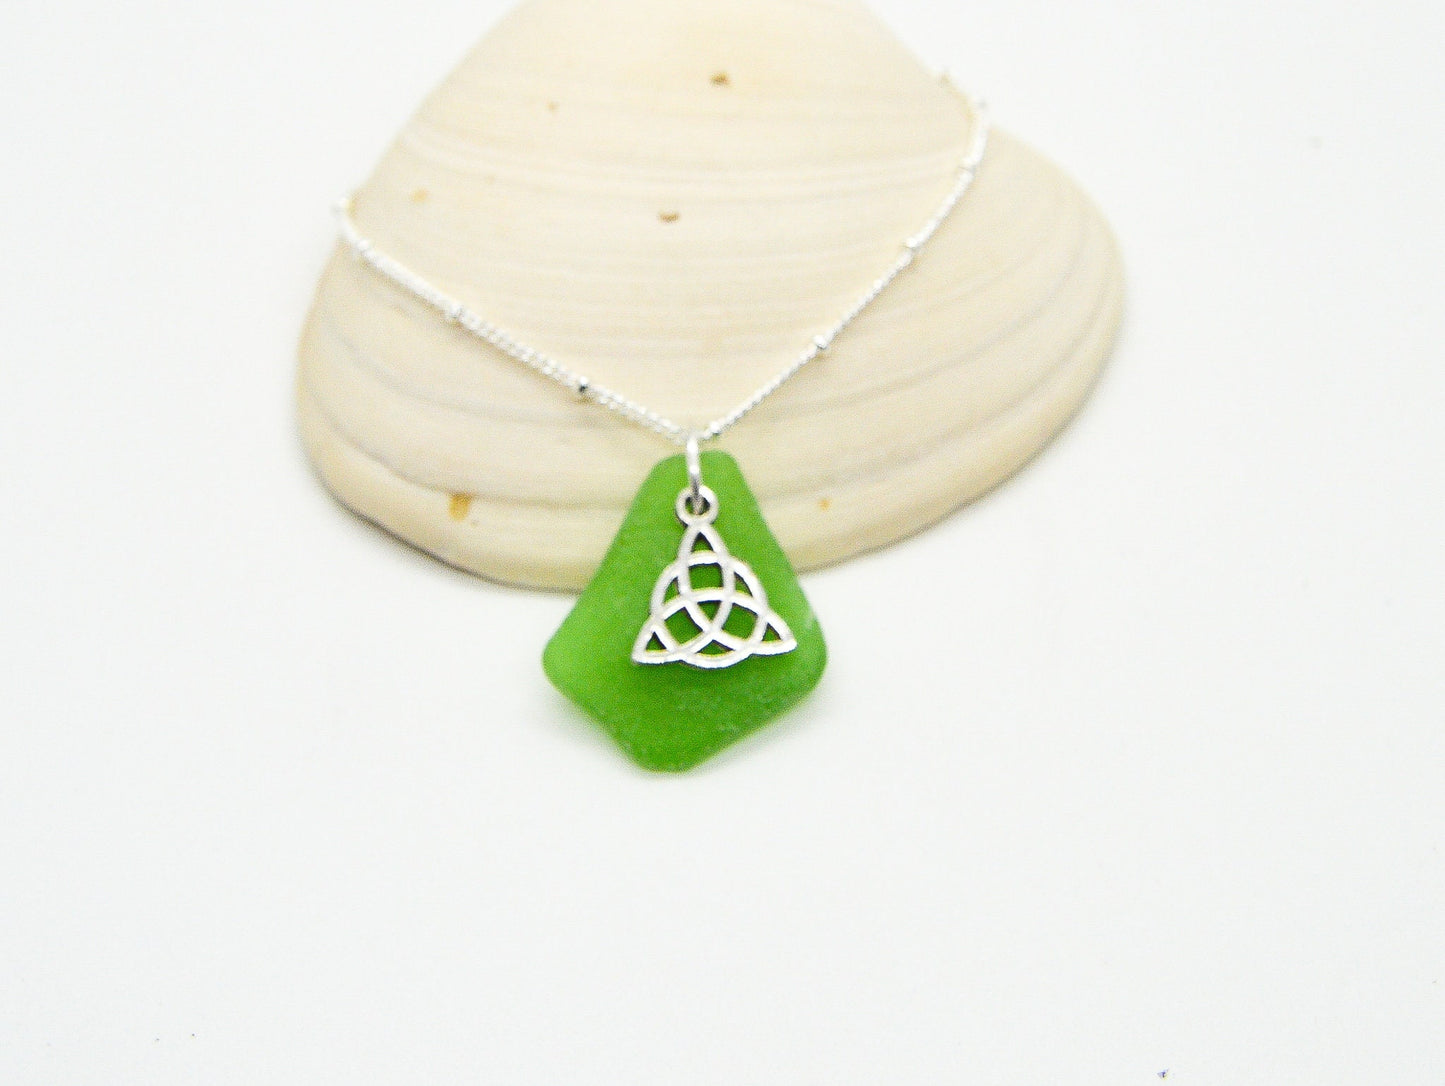 Sea Glass Necklace/St. Patrick's Day Necklace/Celtic Knot Necklace/Genuine Sea Glass/Irish Necklace/Good Luck Charm/Made to Order